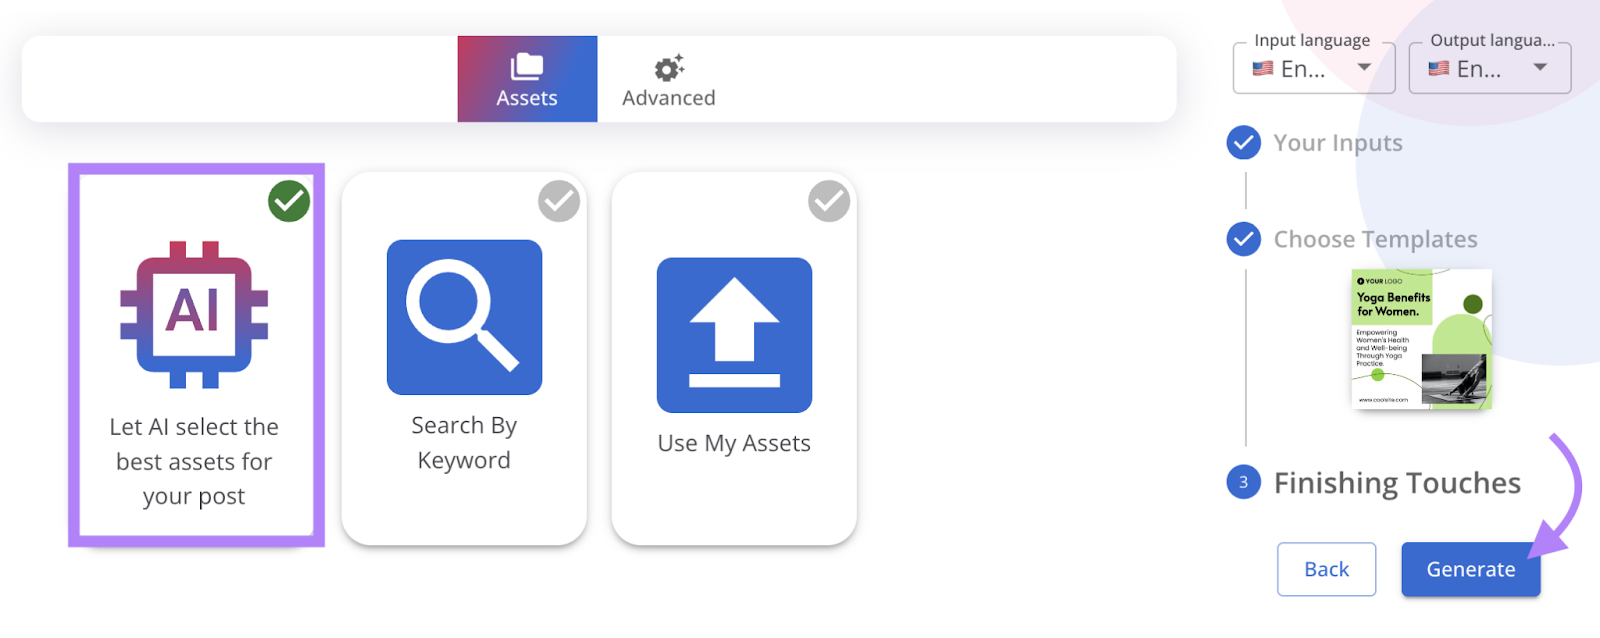 "Let AI select the best assets for your post" option selected